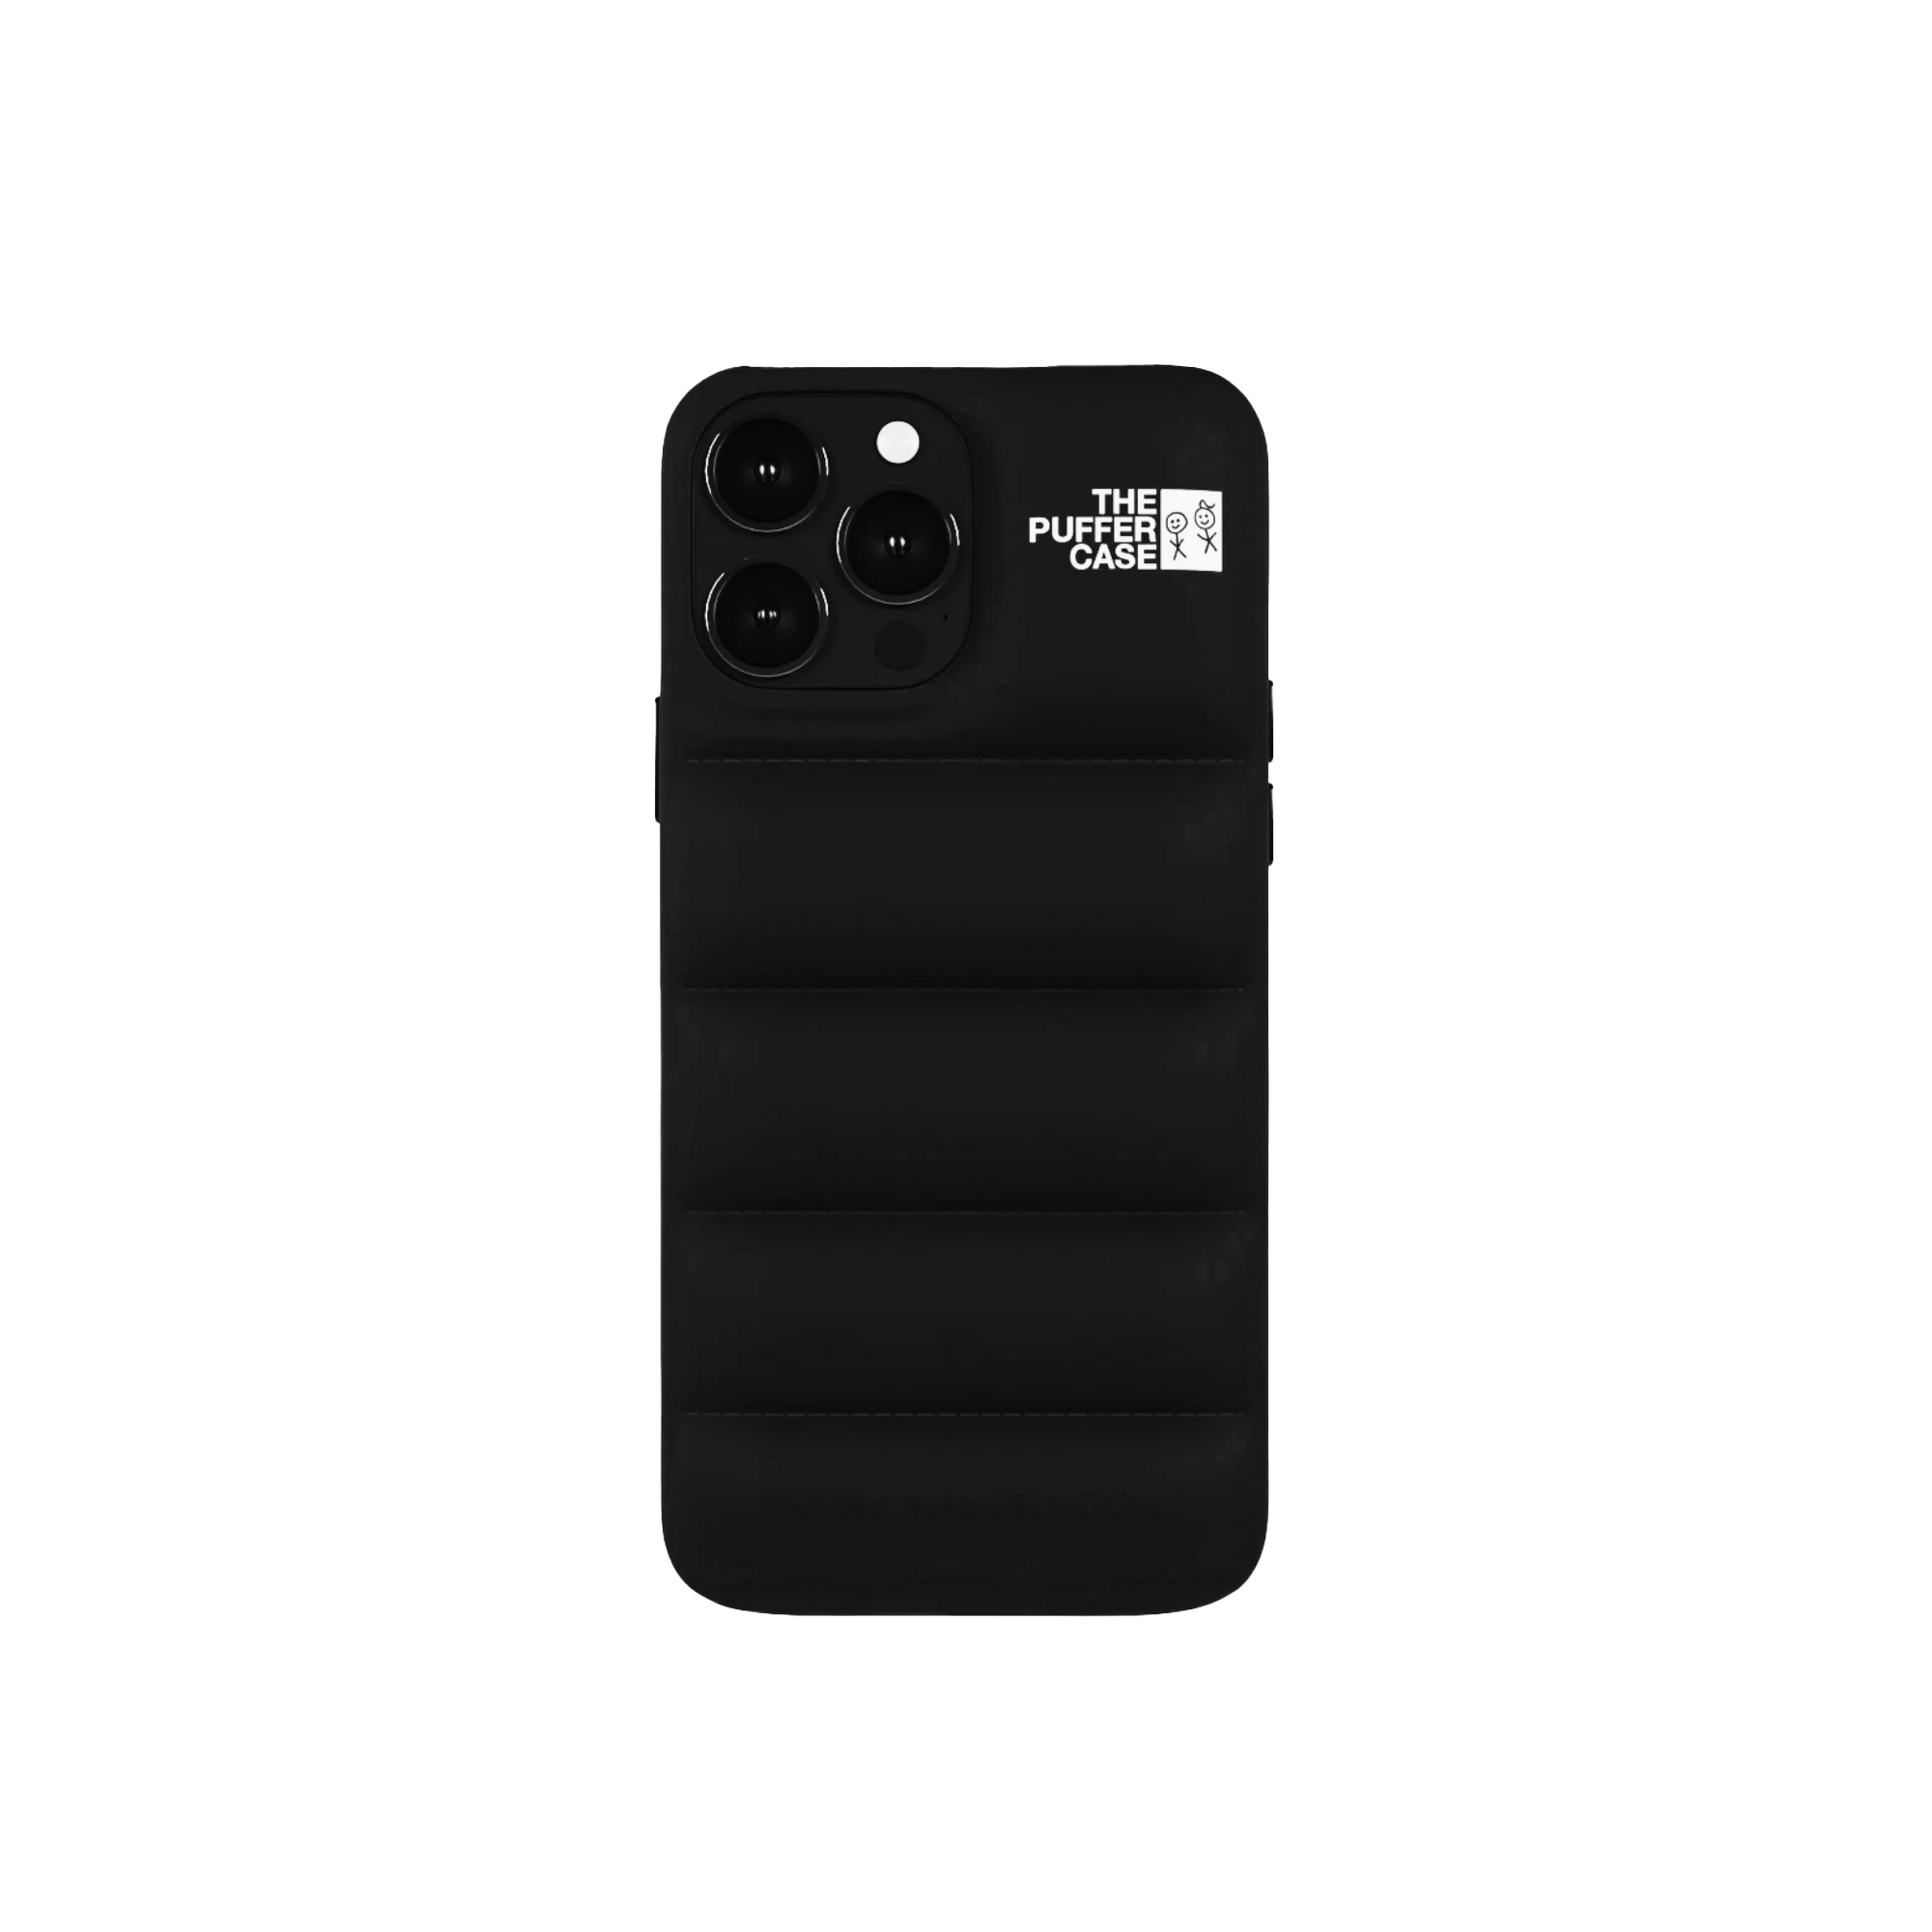 Timeless black Puffer Case for iPhone, the quintessence of style meets function.